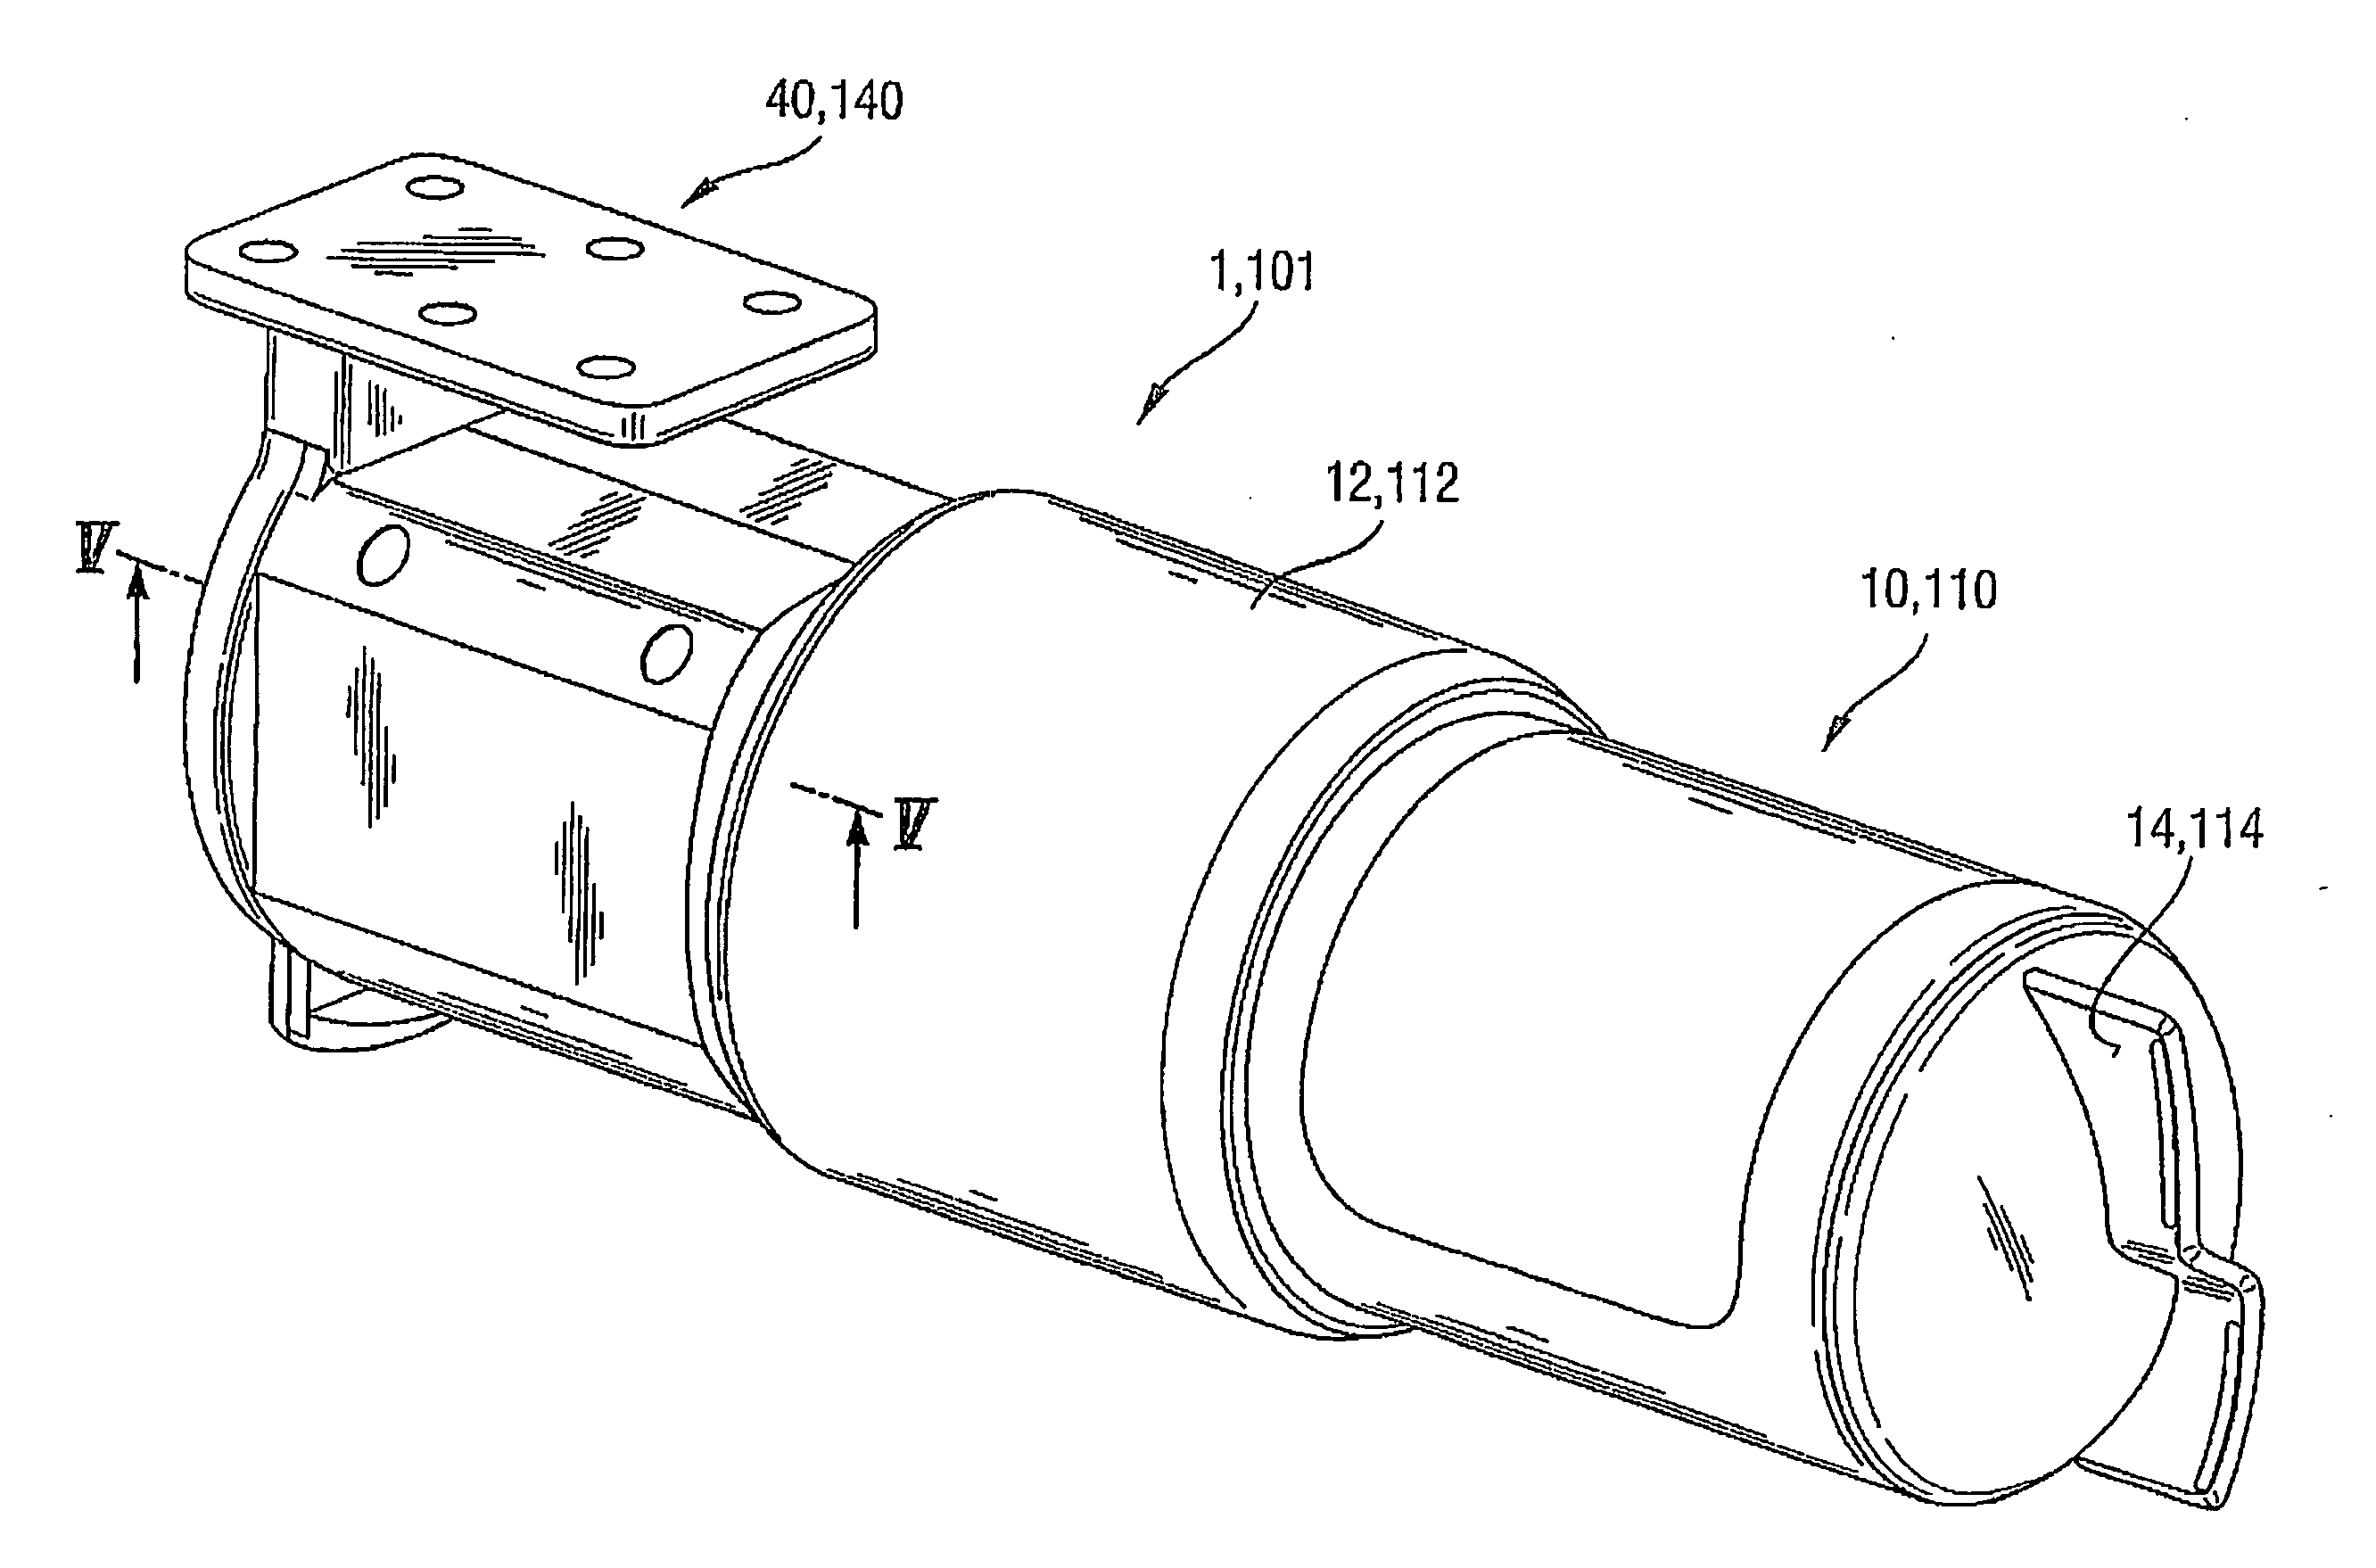 Apparatus for treating water, particularly filter apparatus, and cartridge